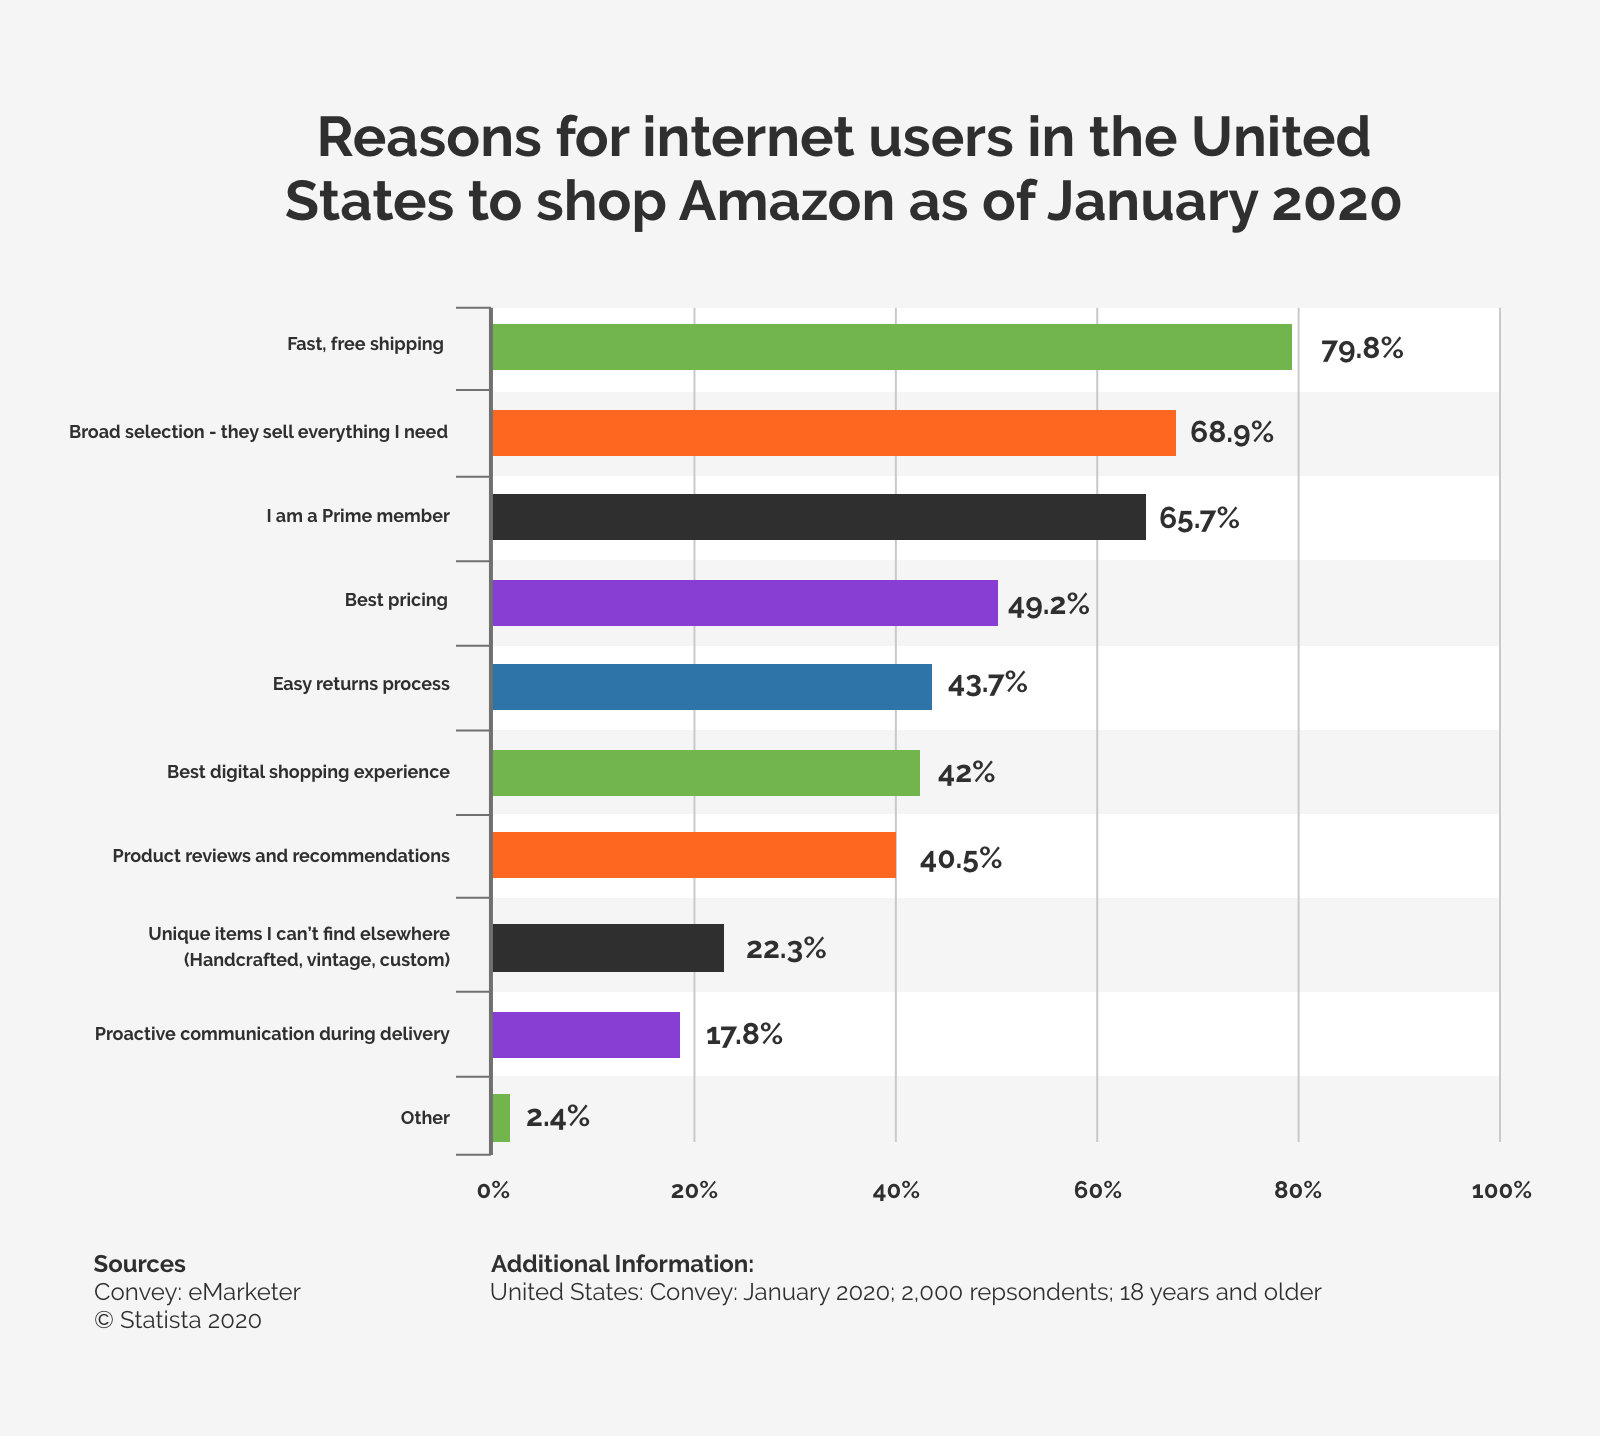 Amazon Reasons for internet users in USA 2020 bar graph